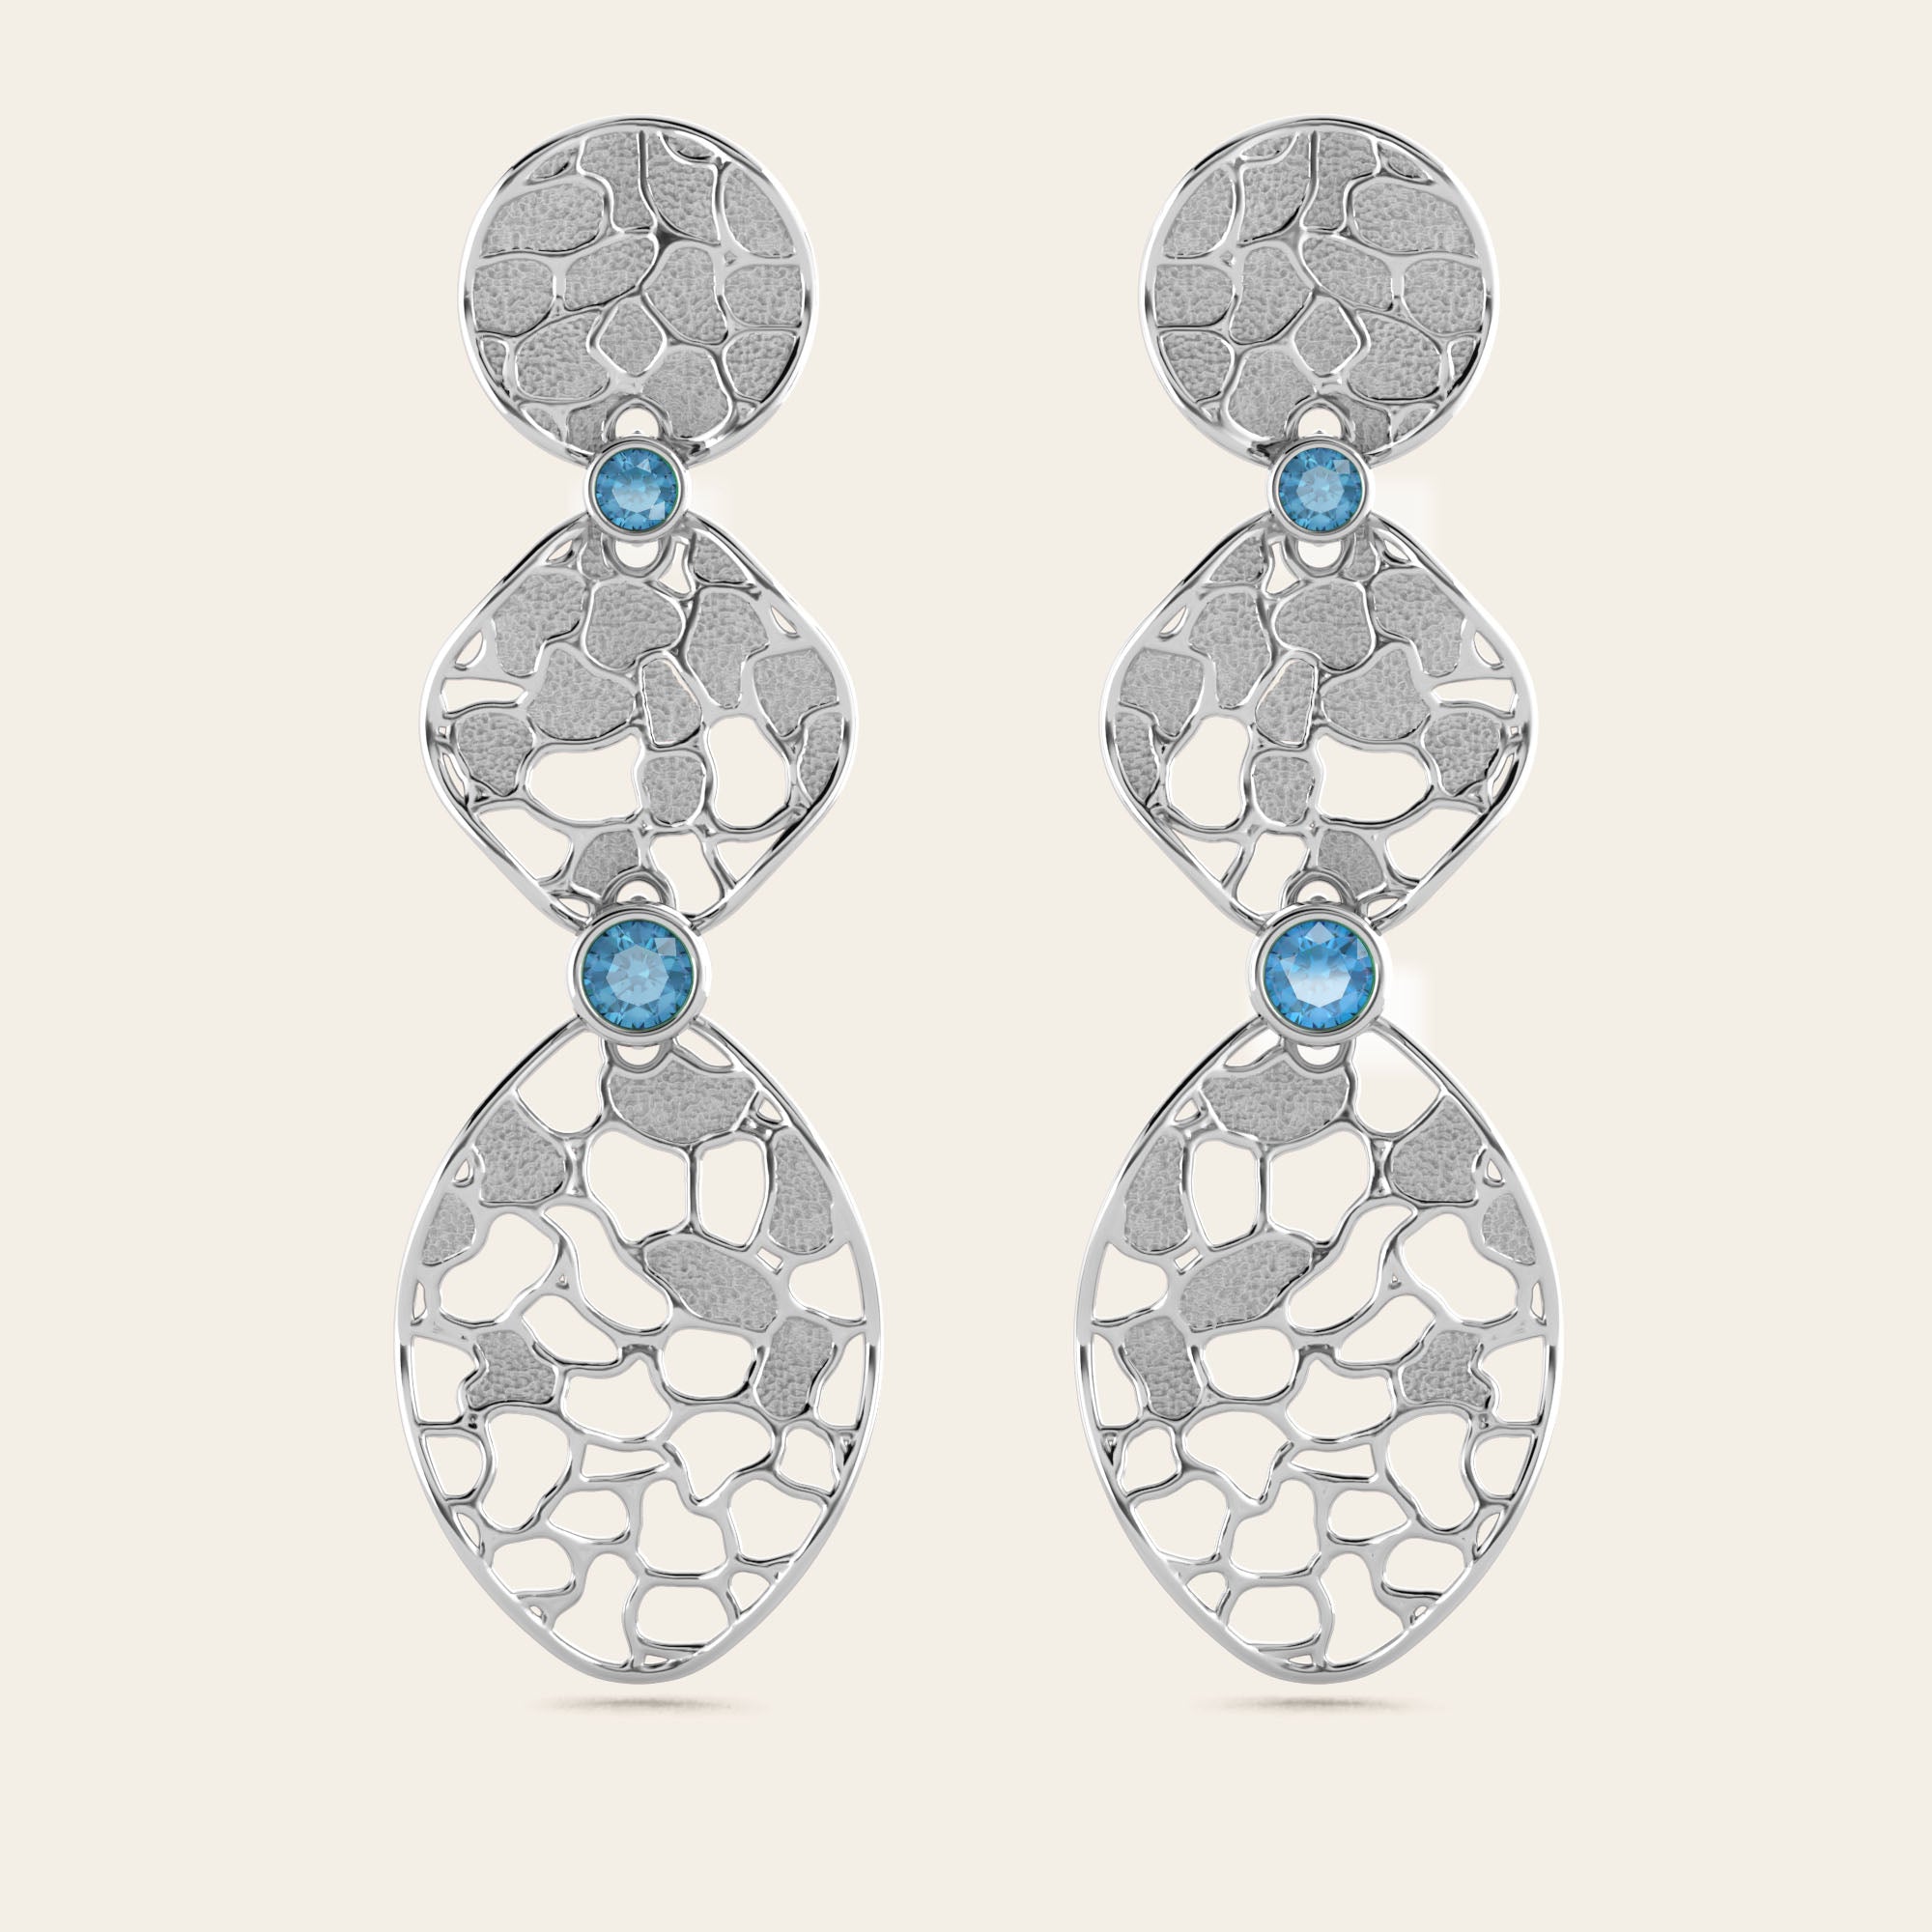 Extended Cracked Earth Dangle Earrings with Blue Zircons in 18k White Gold